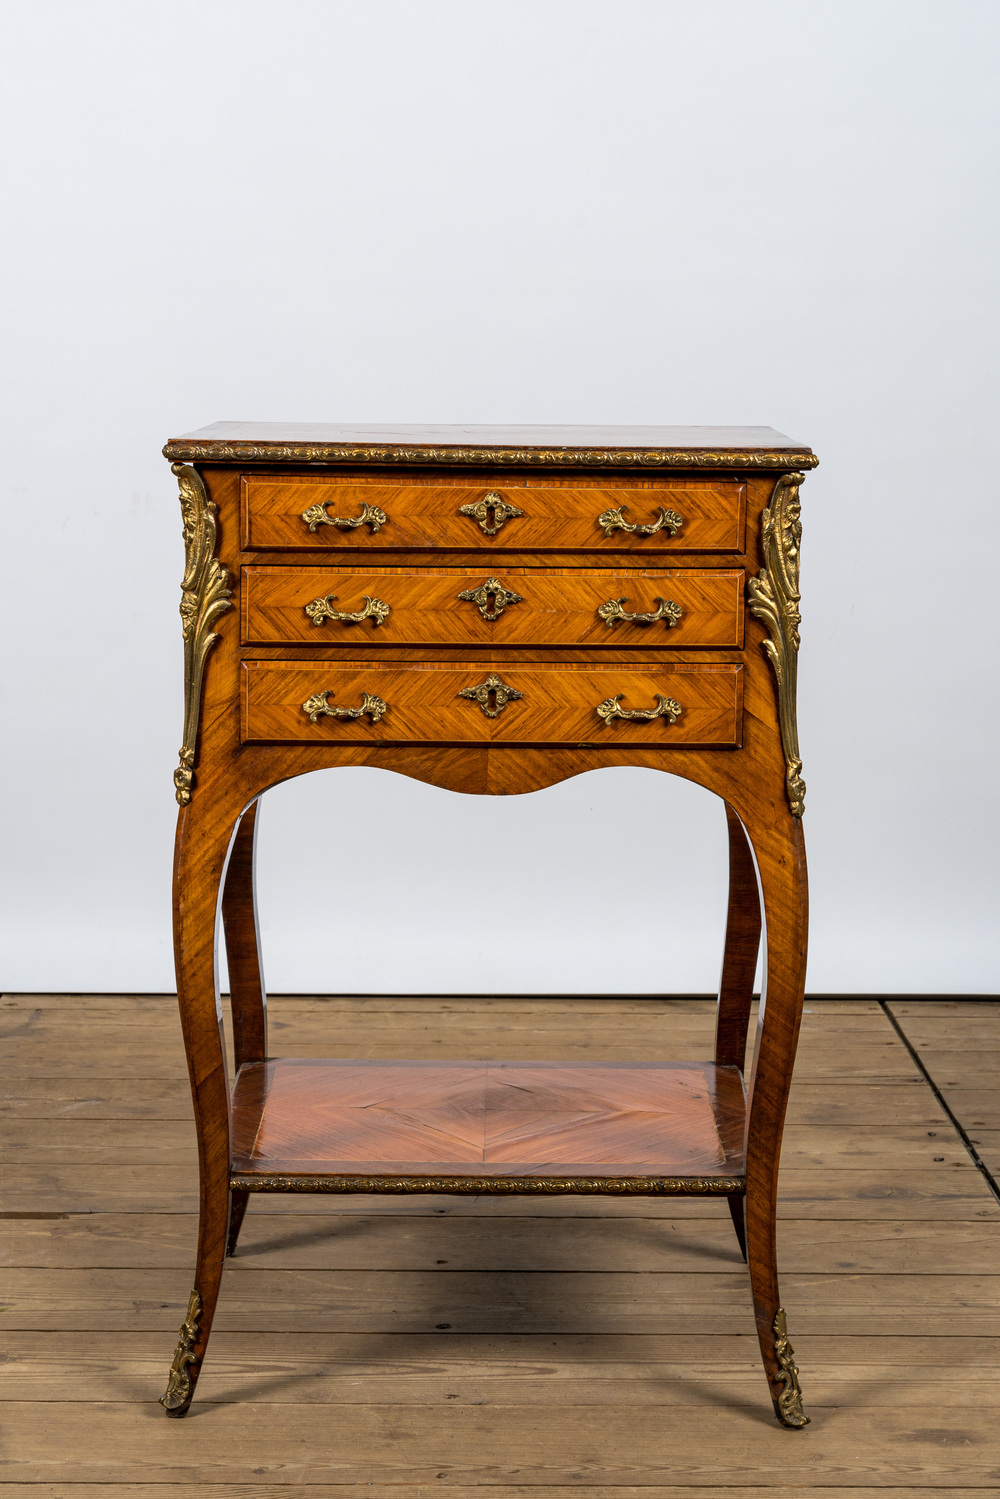 A French gilt bronze mounted three drawer side table, 19/20th C.